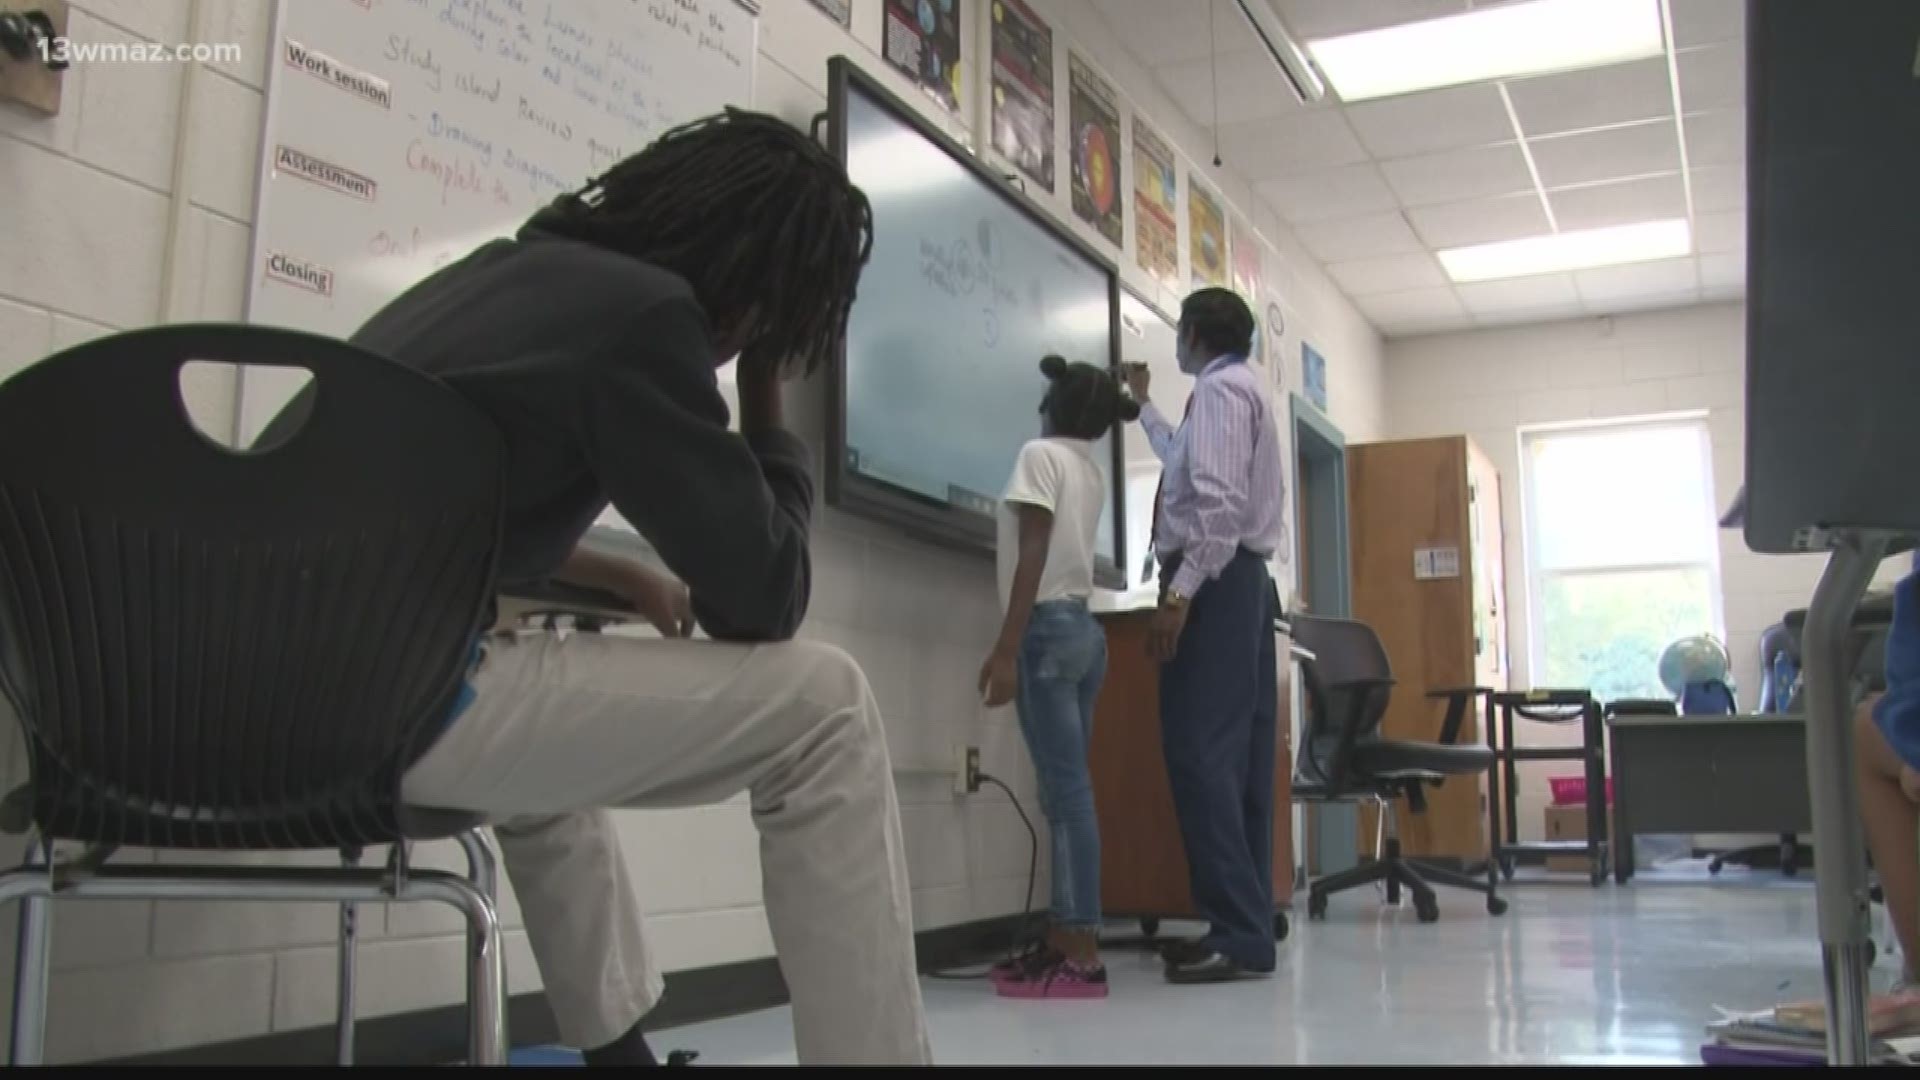 The Bibb County School System is expanding its applicant pool beyond Central Georgia -- they're hiring from around the world.